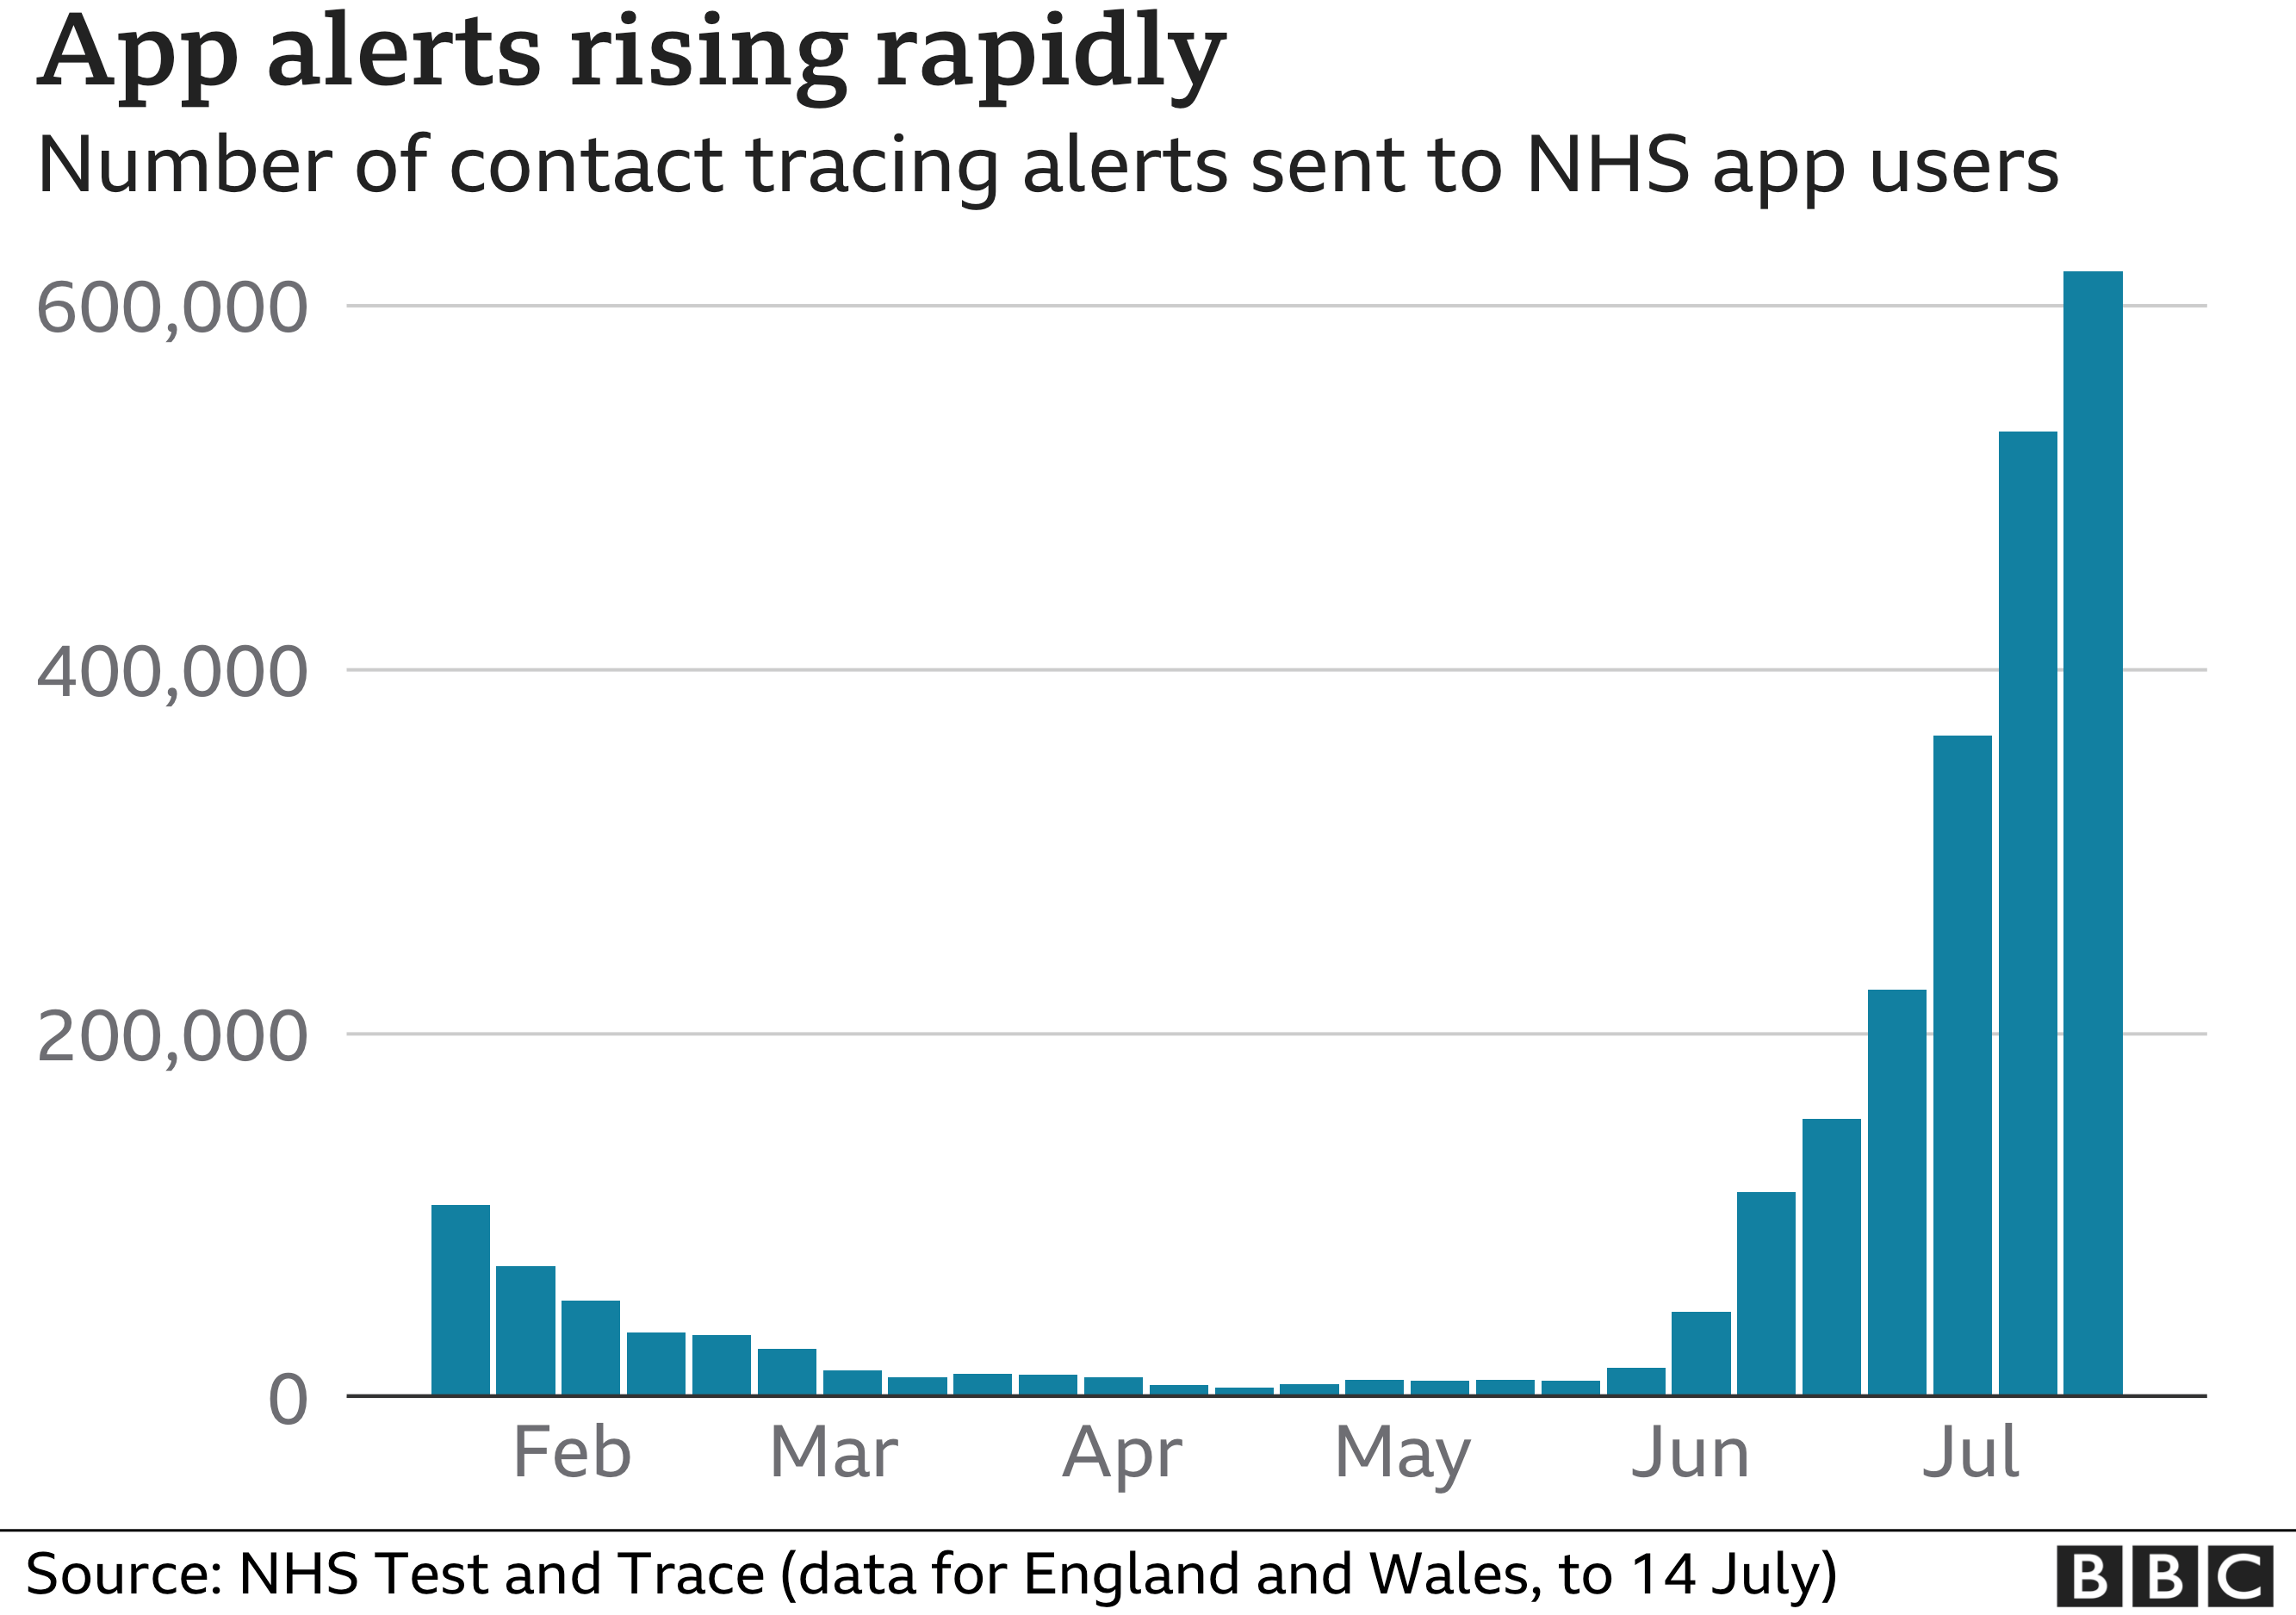 Chart showing app alerts rising rapidly